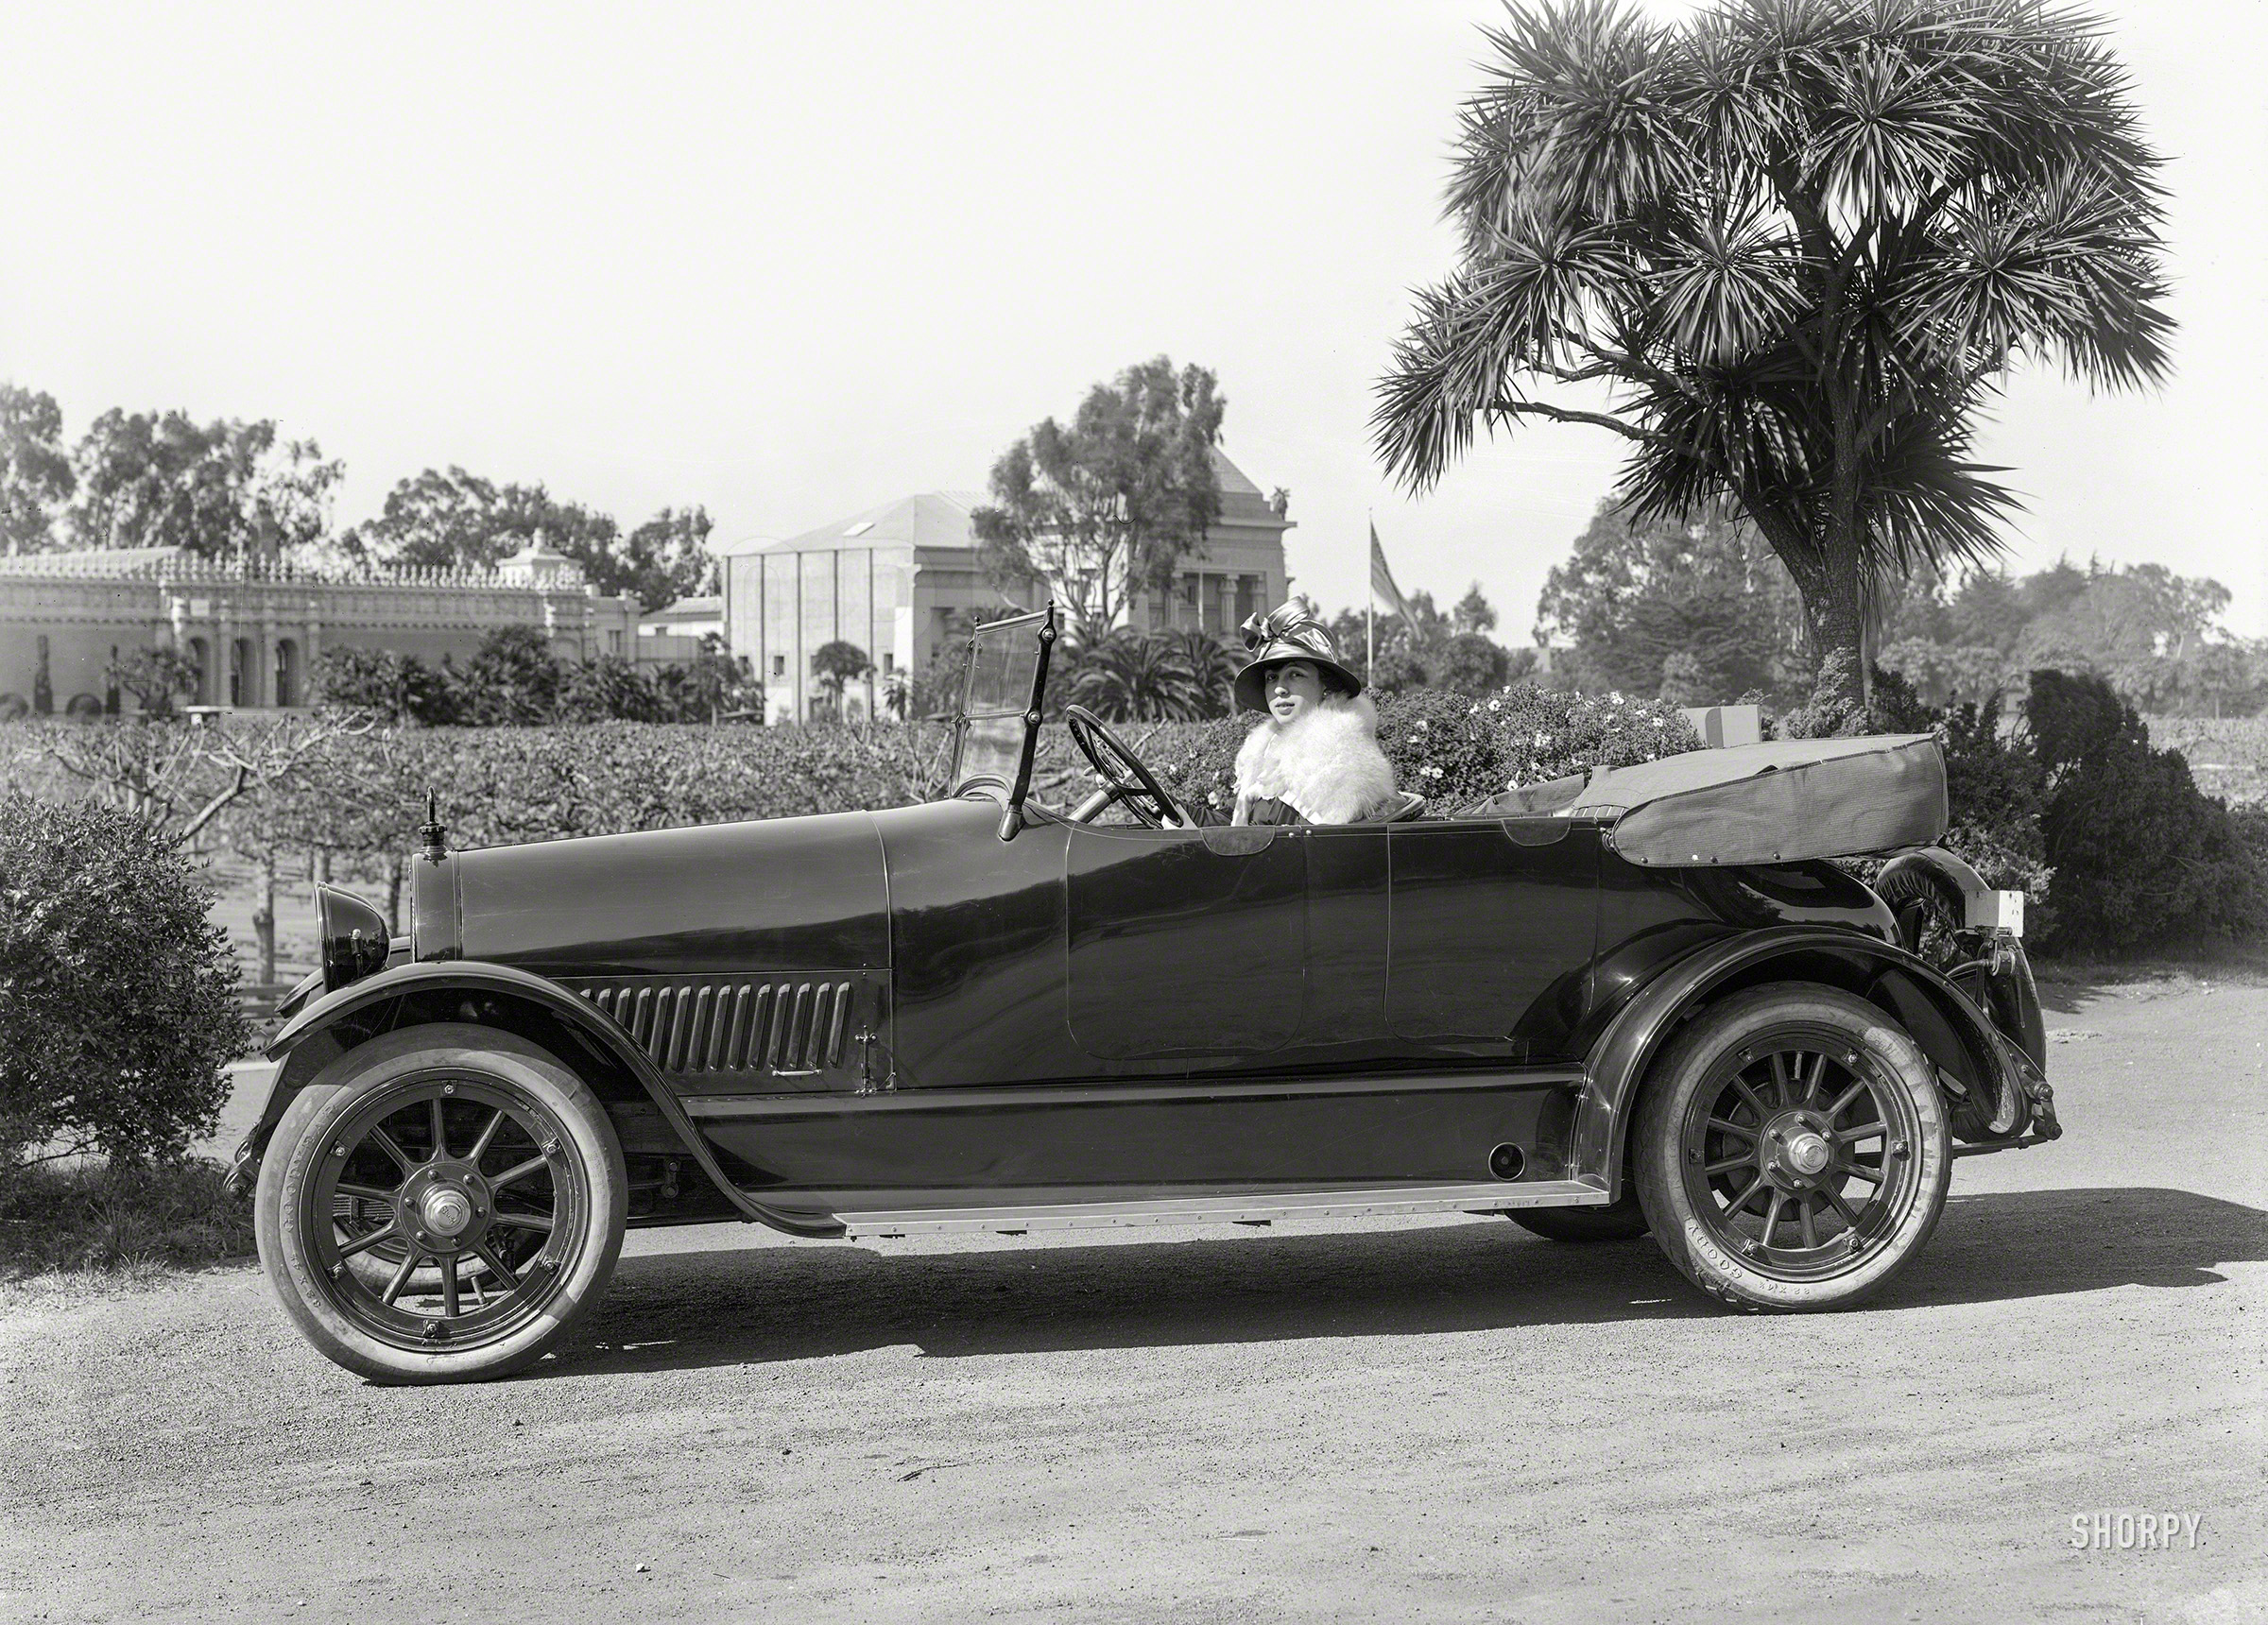 San Francisco circa 1918. "Haynes 'Fourdore' four-passenger roadster at Golden Gate Park," with the De Young Museum and Museum of Antiquities forming the backdrop. 5x7 glass negative by Christopher Helin. View full size.